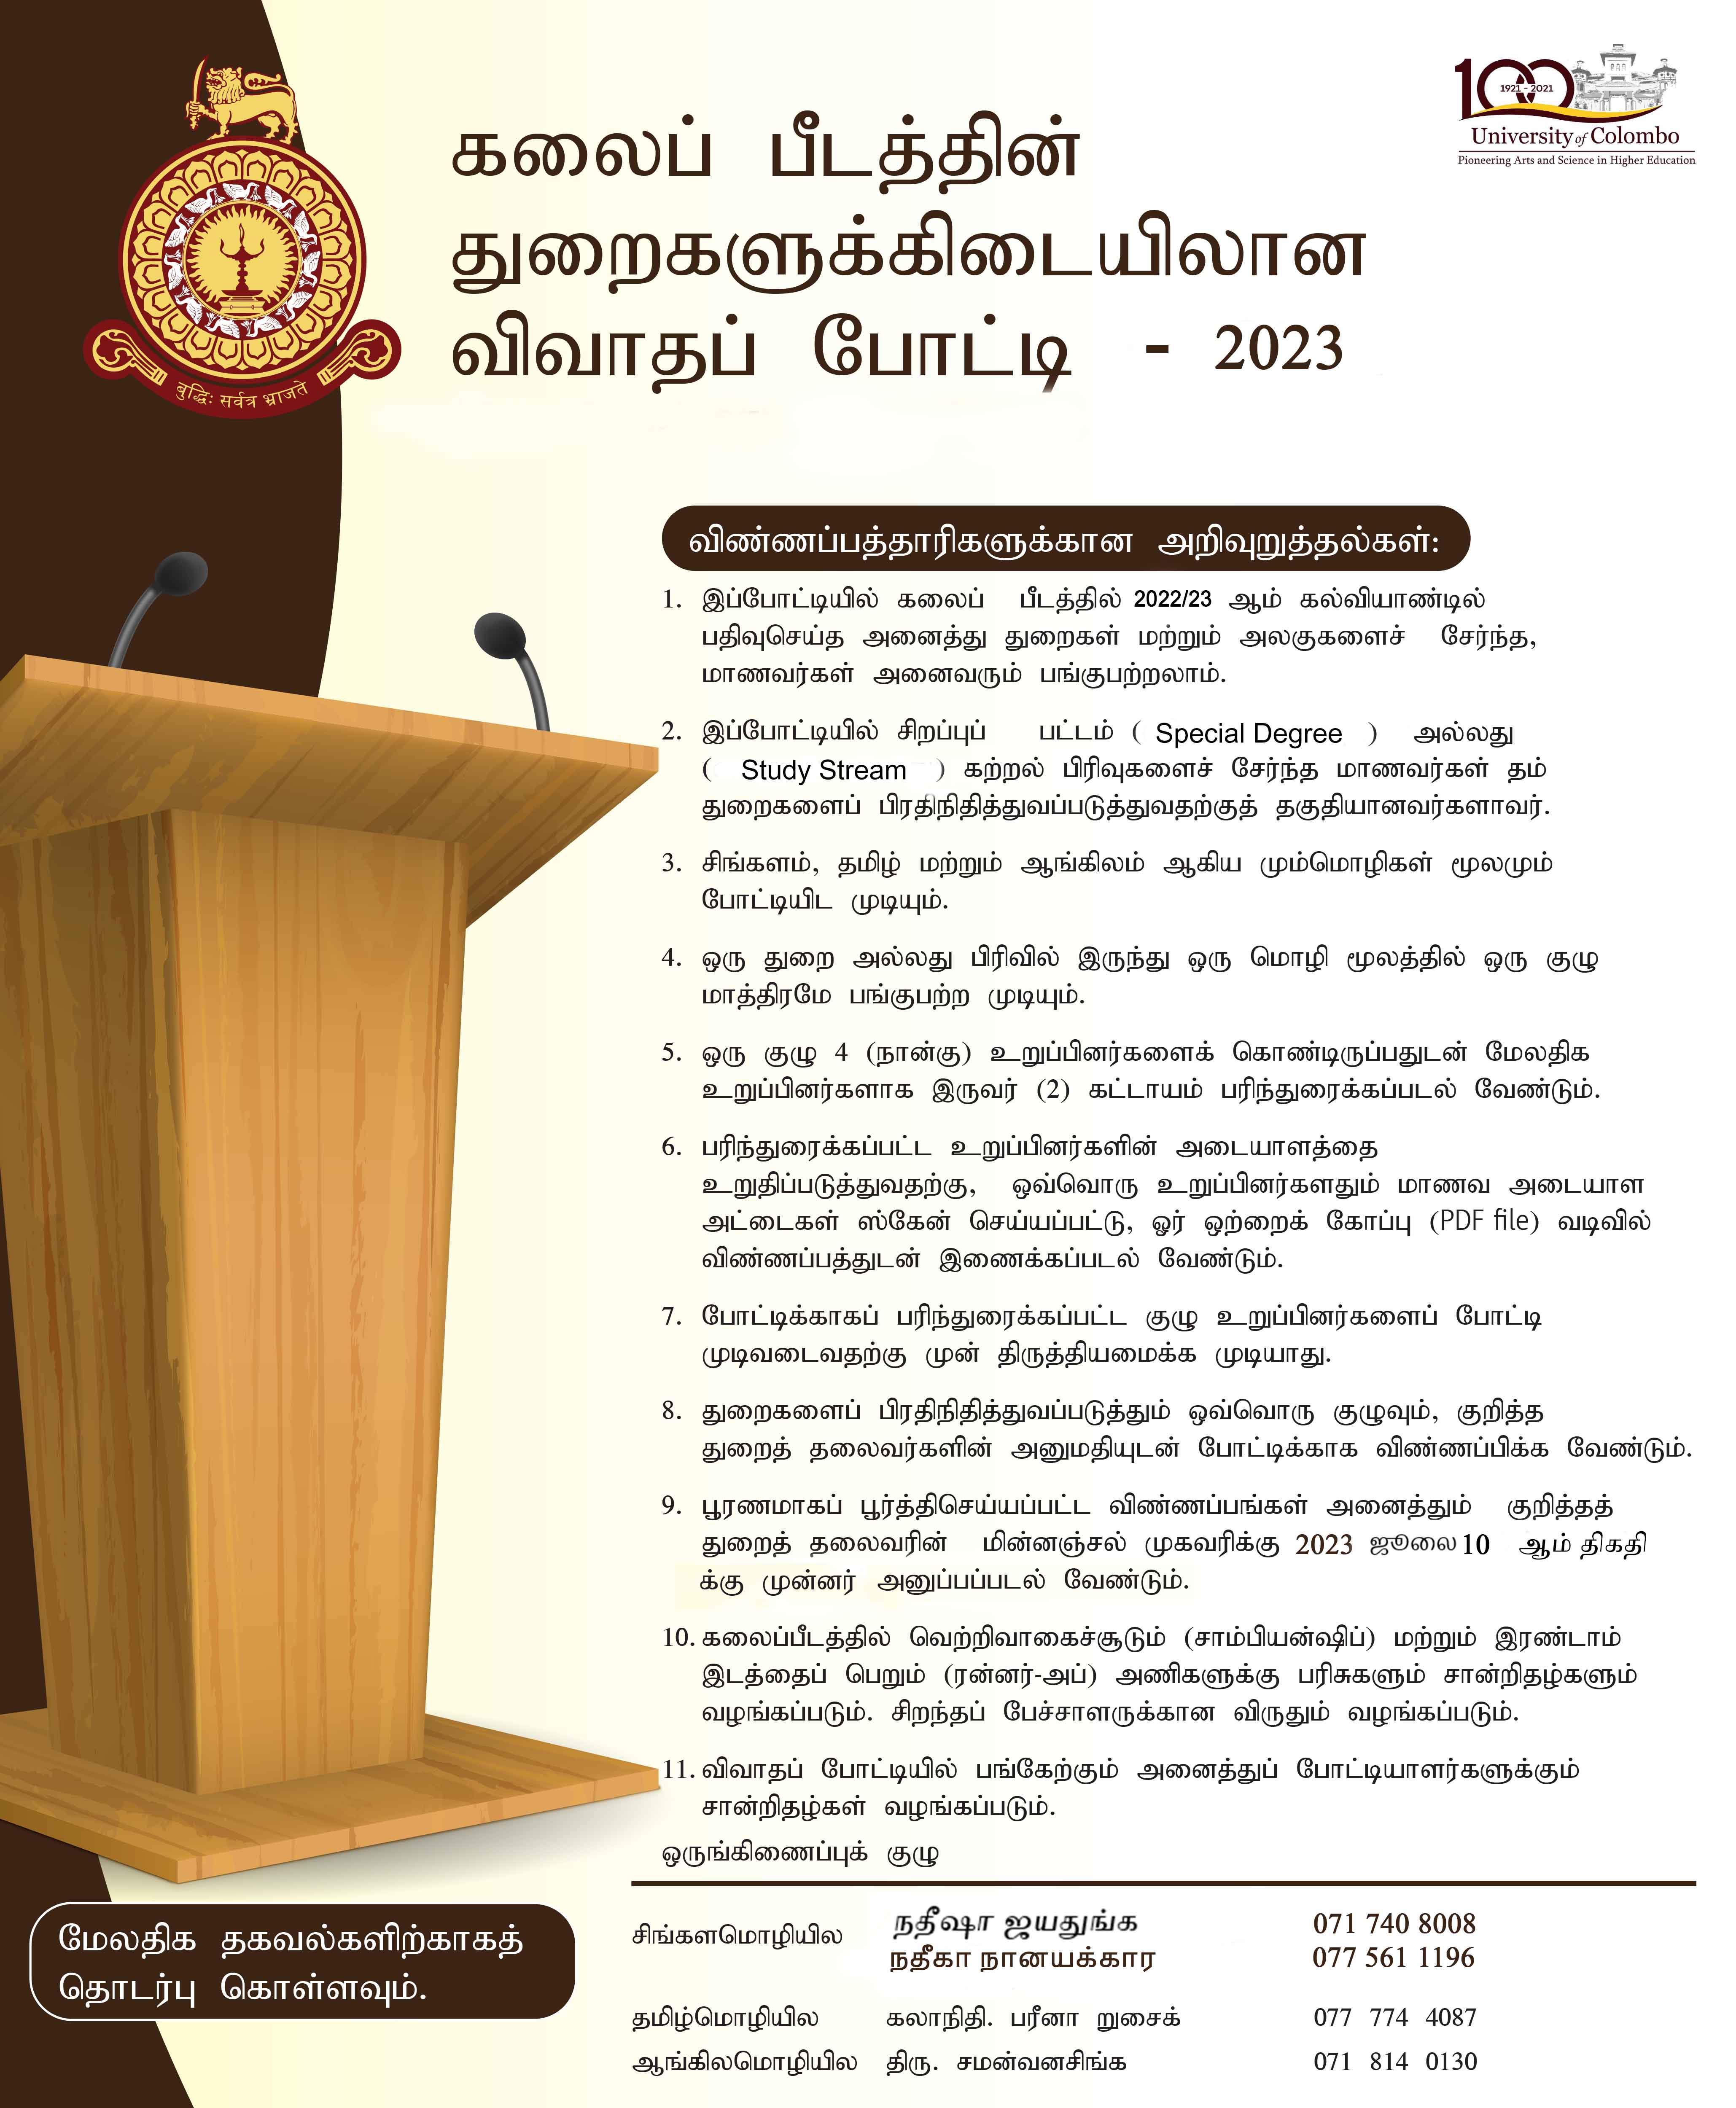 Attachment Flyer-Tamil_Revised (3).jpg